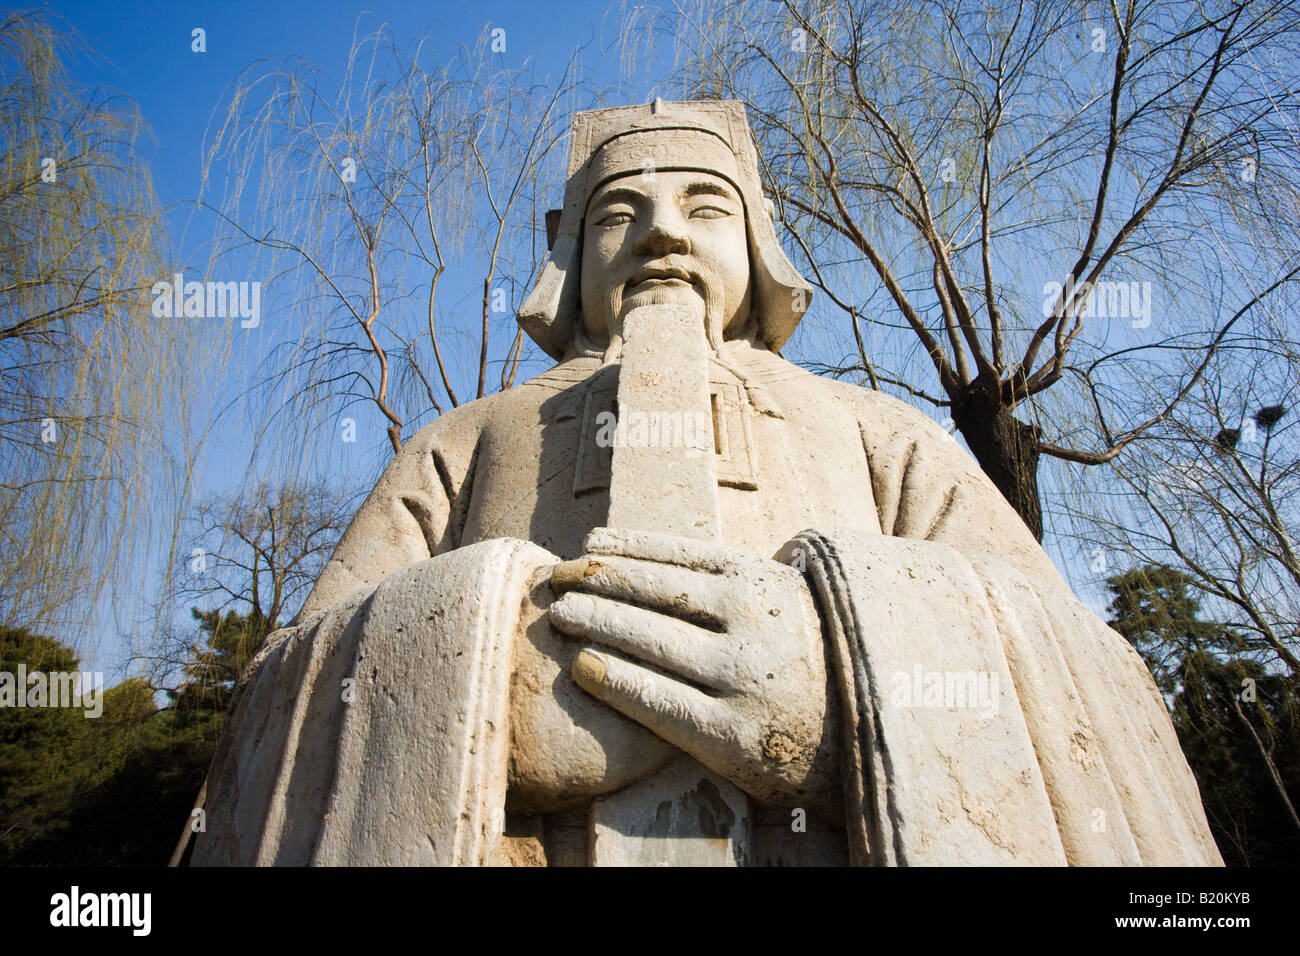 Statue of high civil official advisor to the emperor on Spirit Way at Ming Tombs site Changling Beijing China Stock Photo